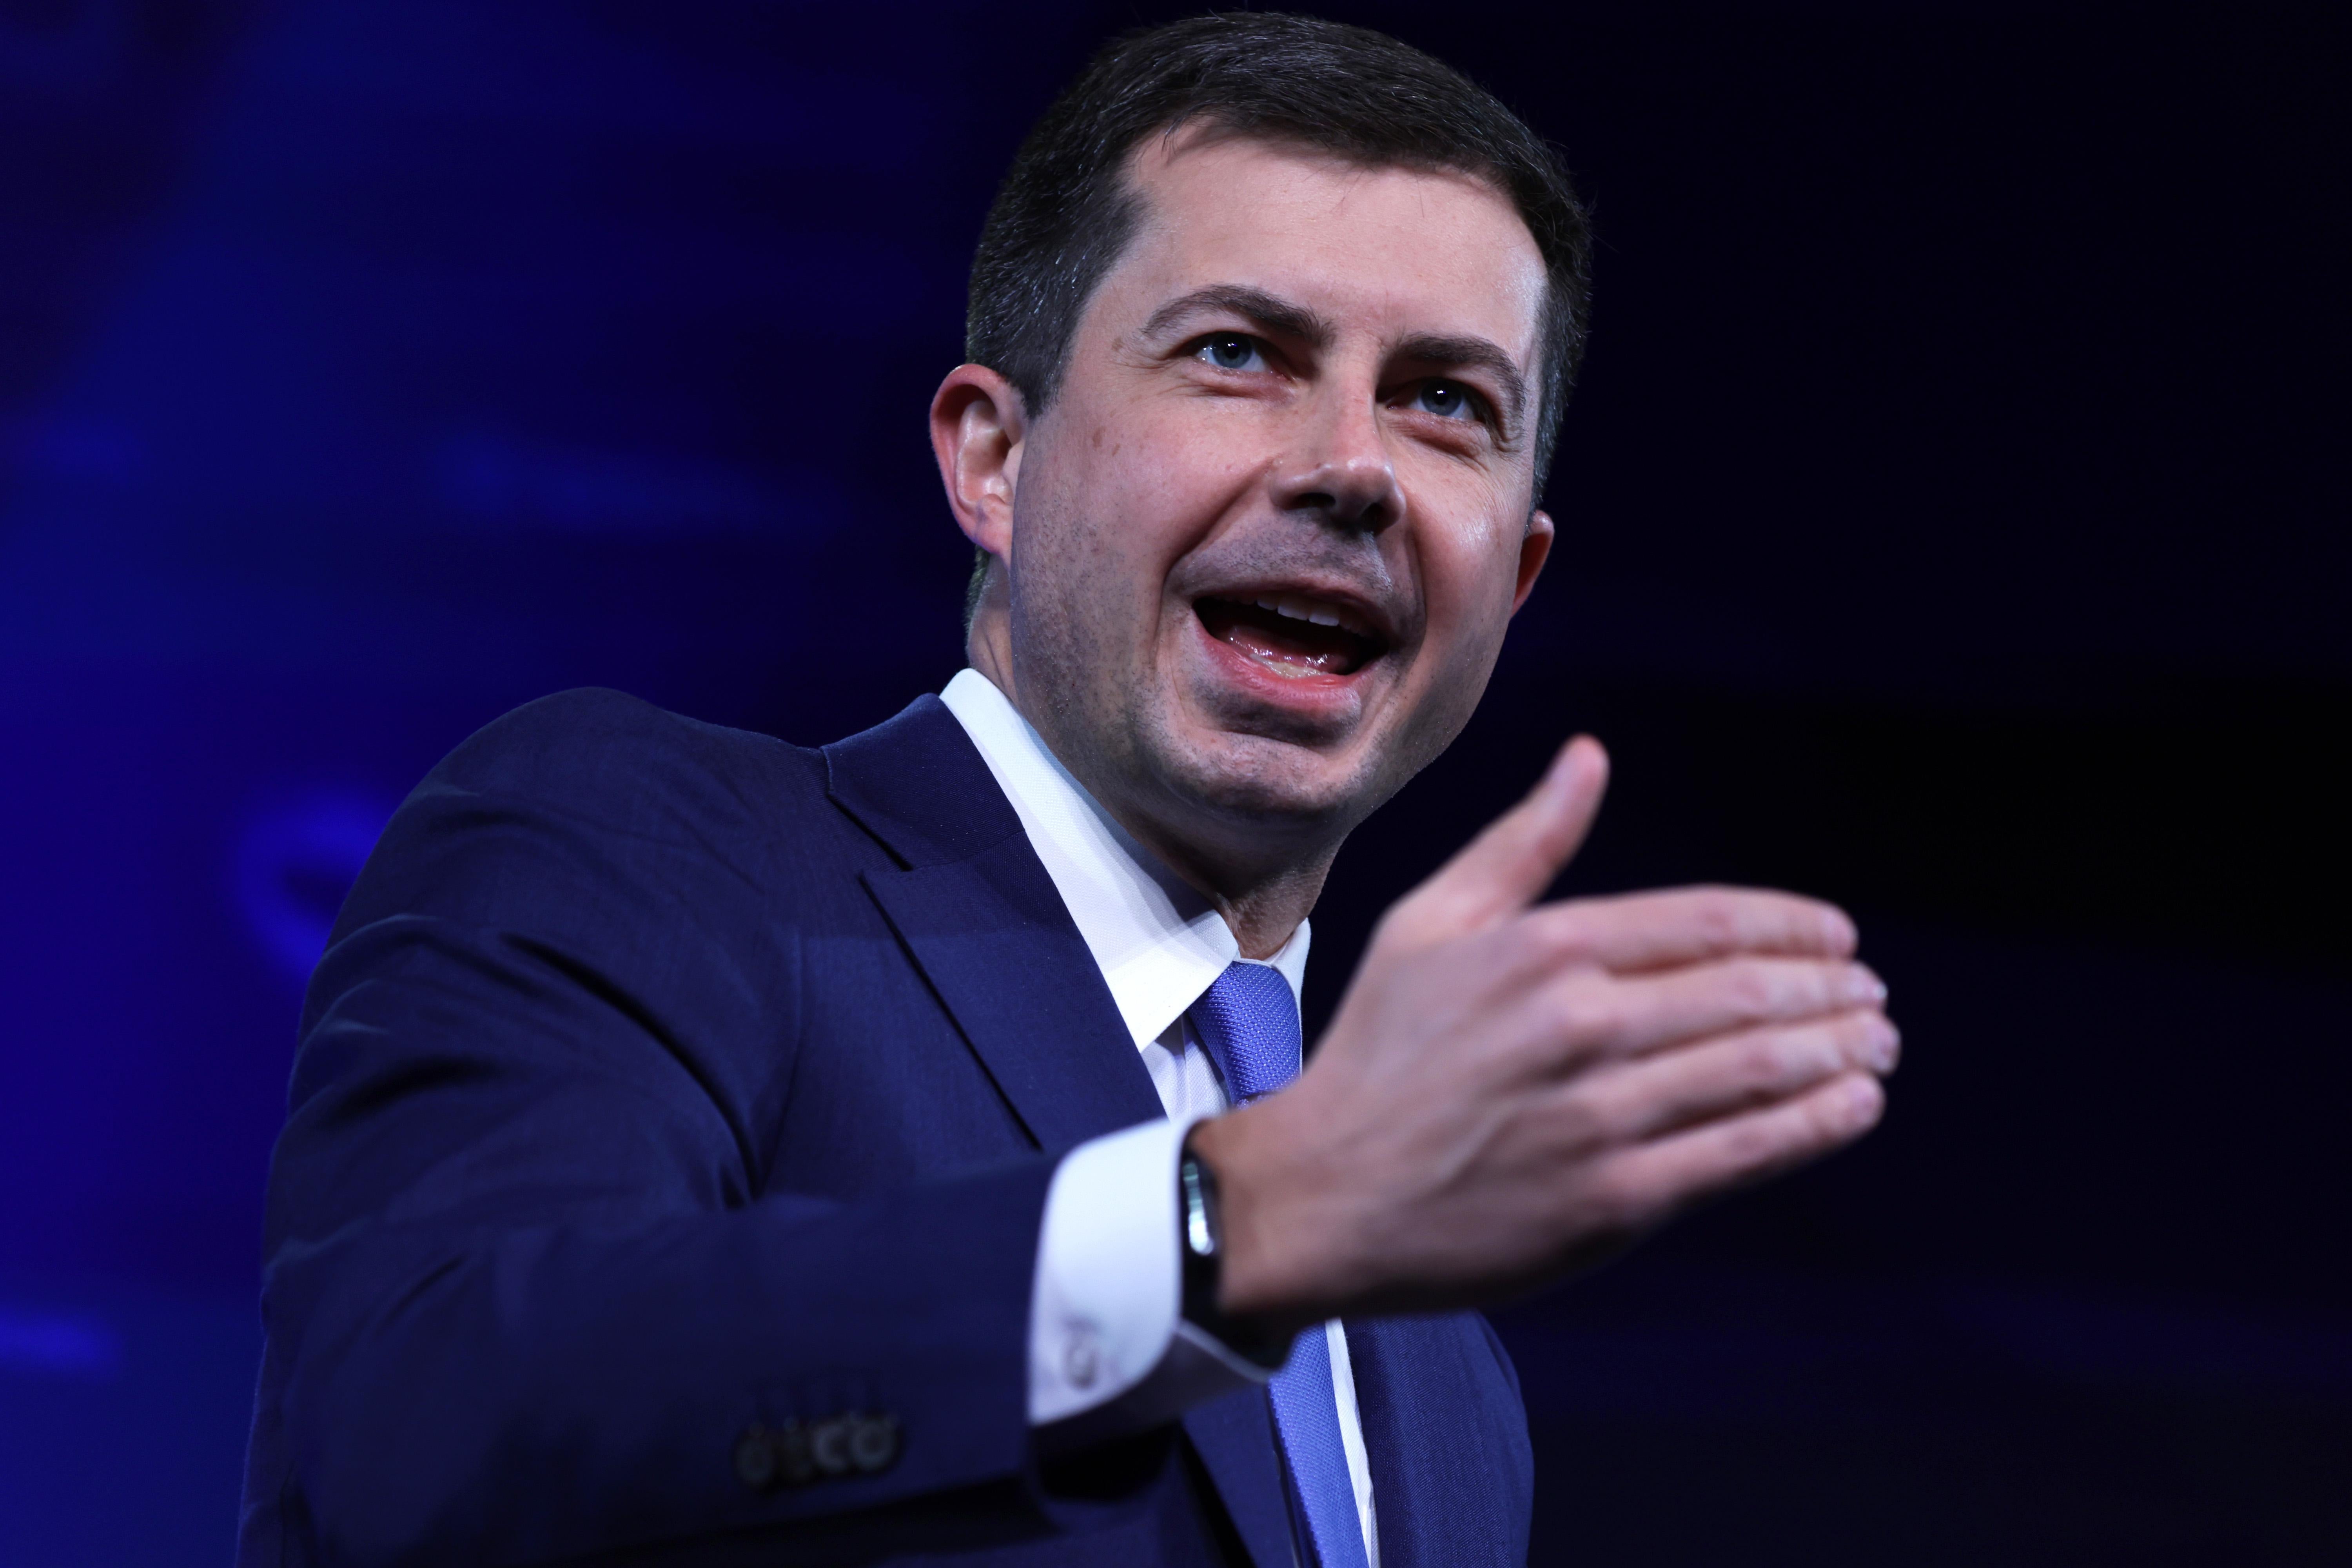 Pete Buttigieg gesturing with one hand as he speaks onstage